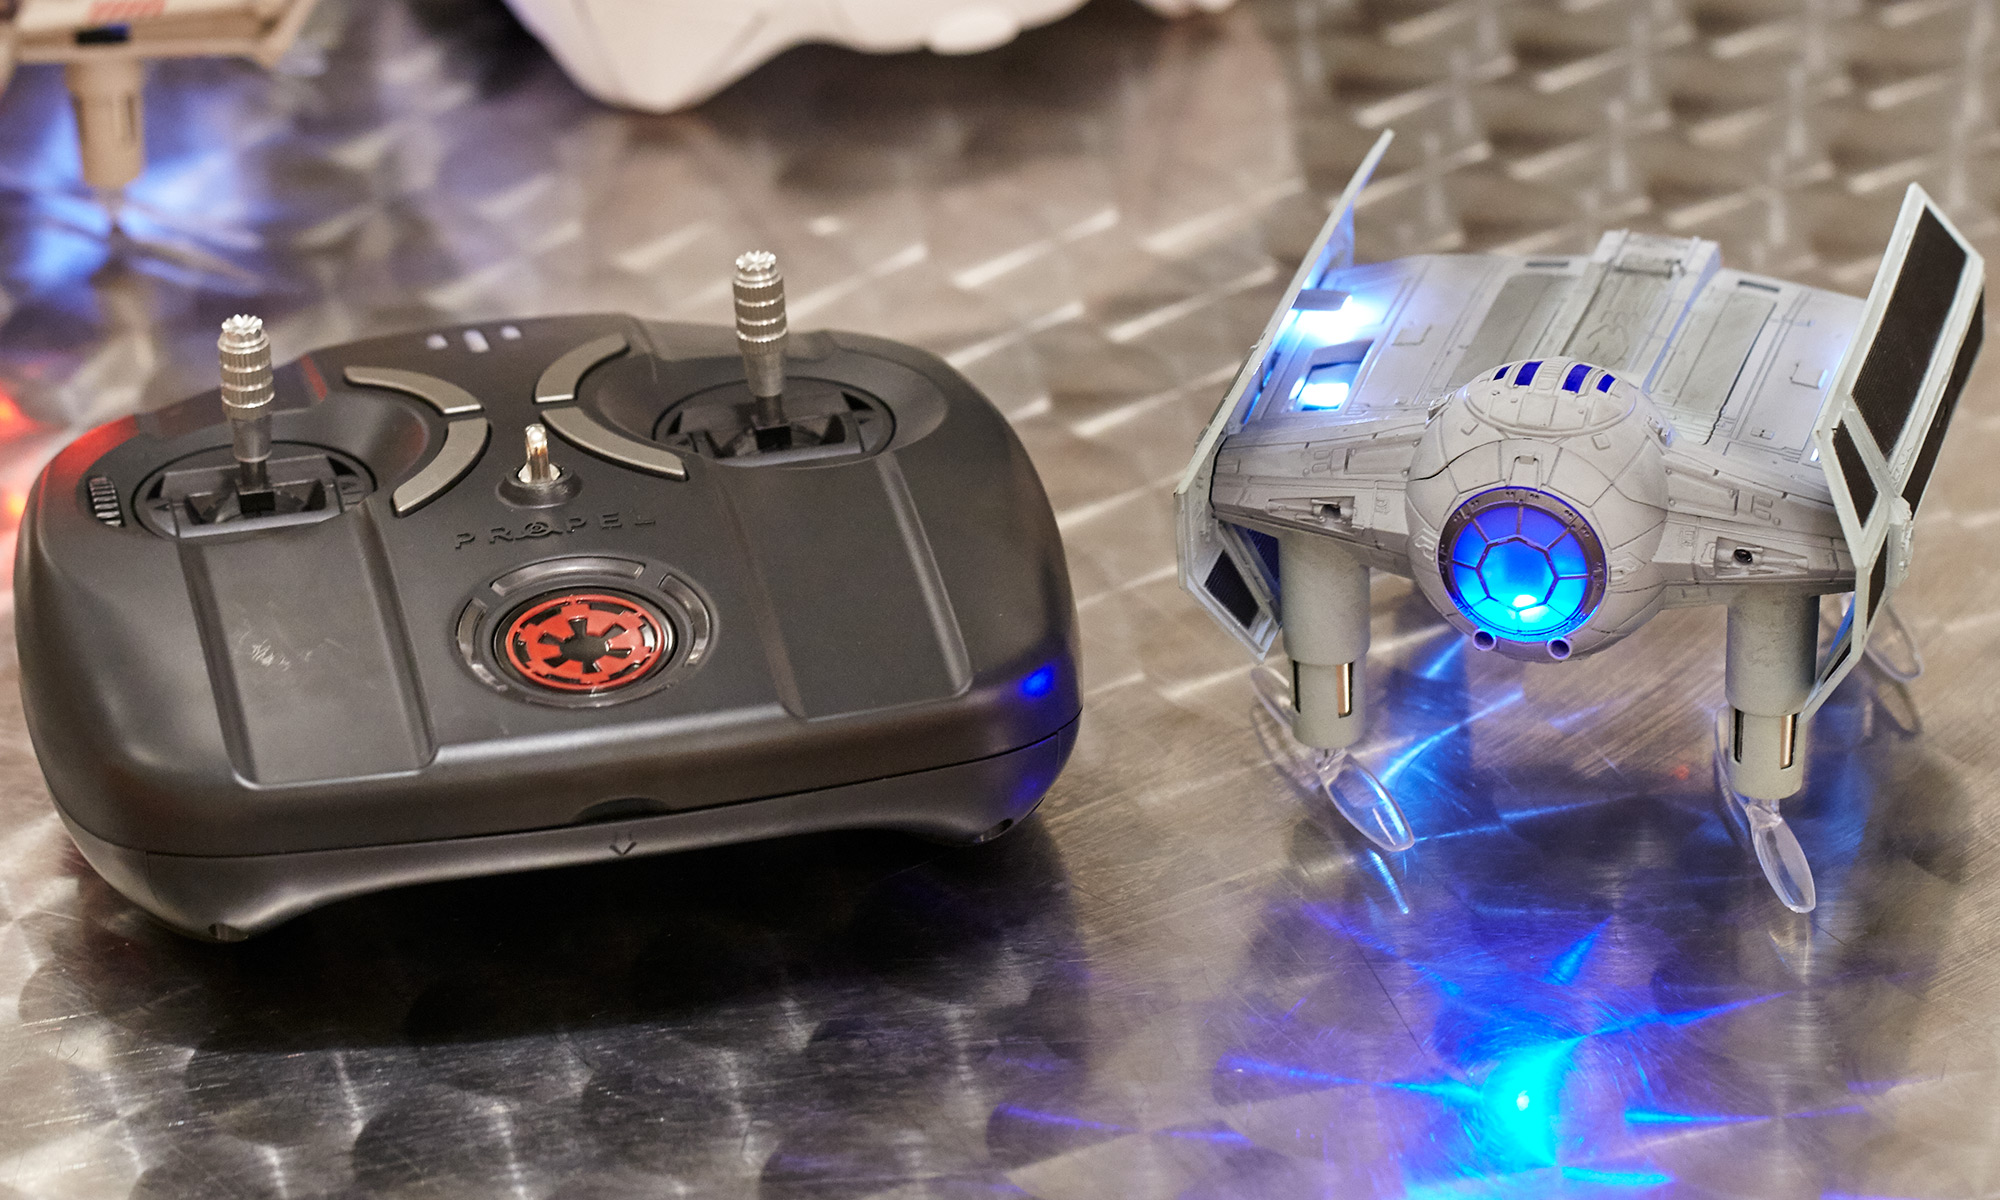 Propel Star Wars Drone Review: Drones You're Looking | Tom's Guide